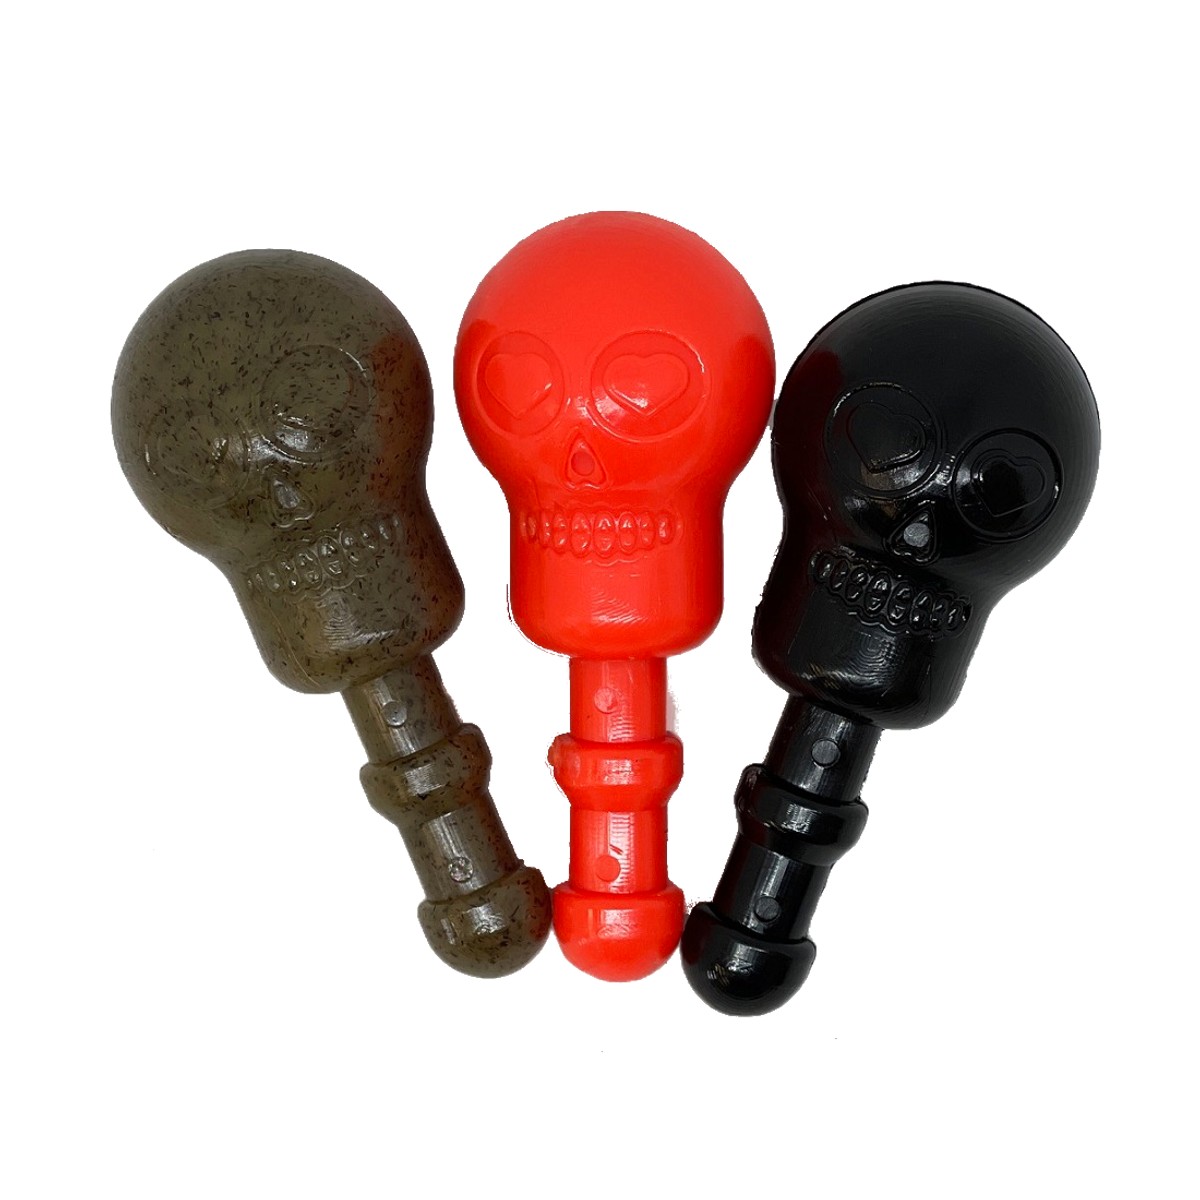 SodaPup Unstoppables Chewers Treat Dispenser Stoppers Dog Toy - 3 Pack Skulls